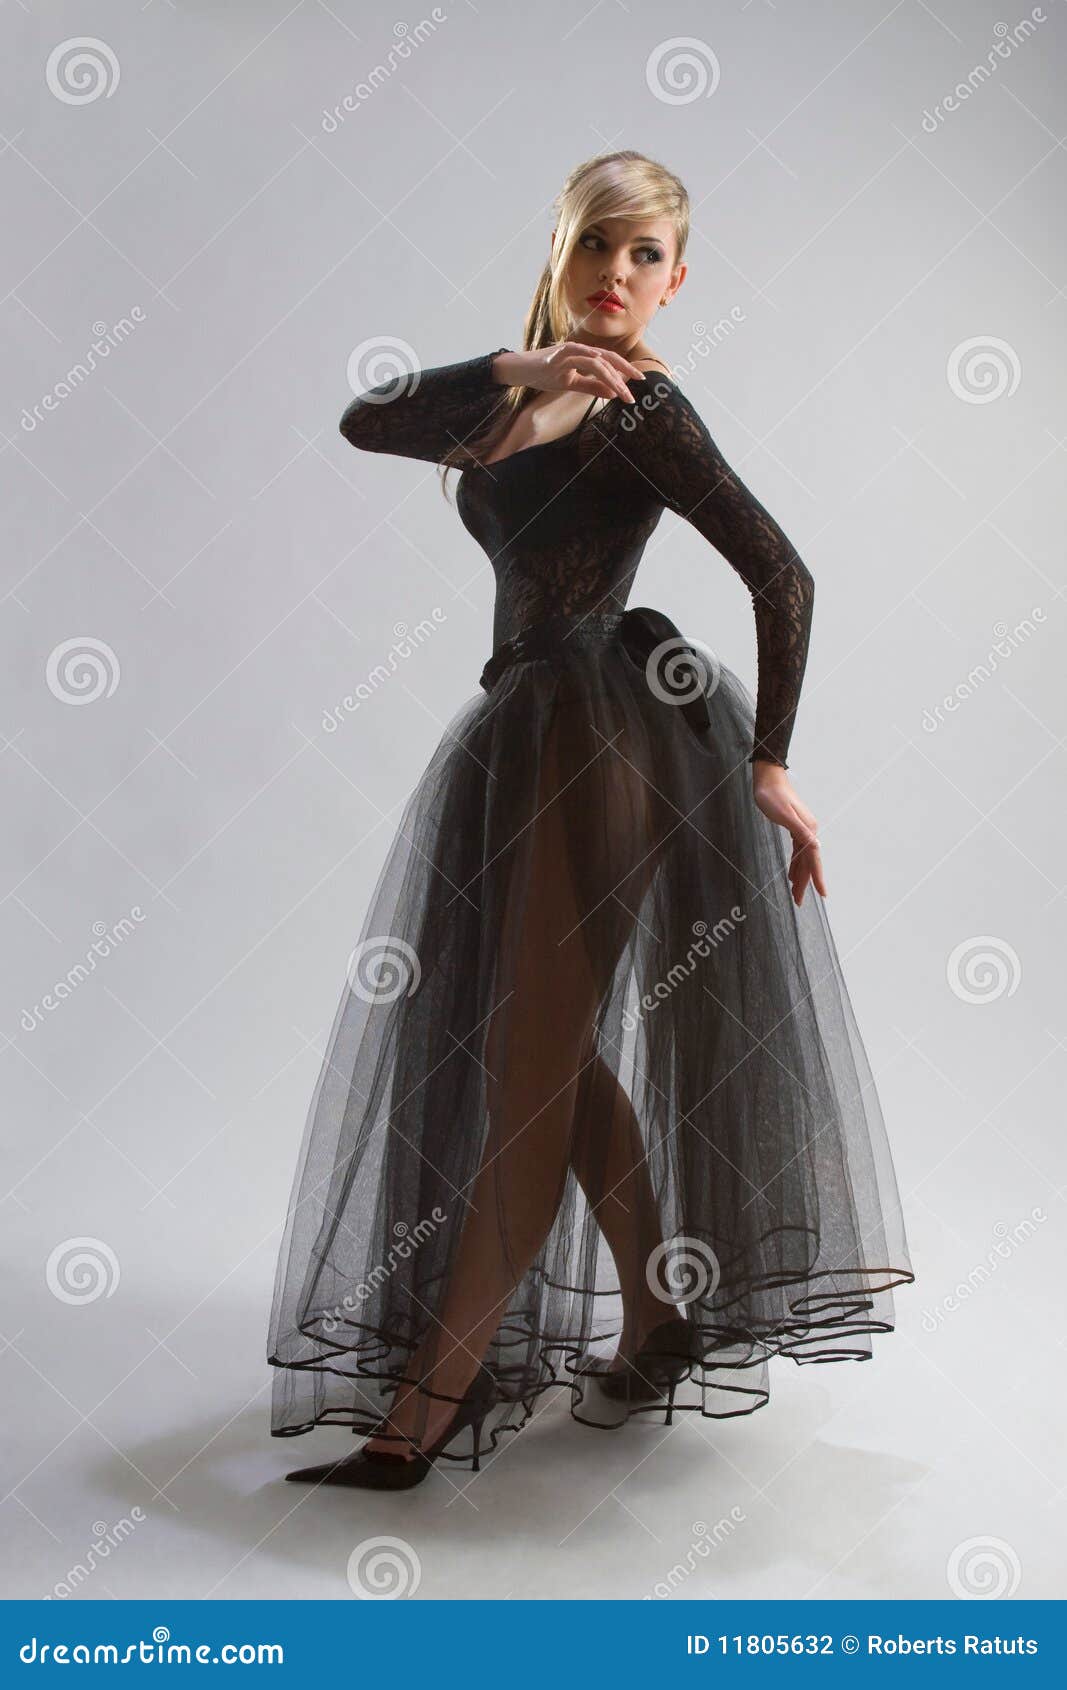 Girl In Diaphanous Dress Stock Photography - Image: 11805632